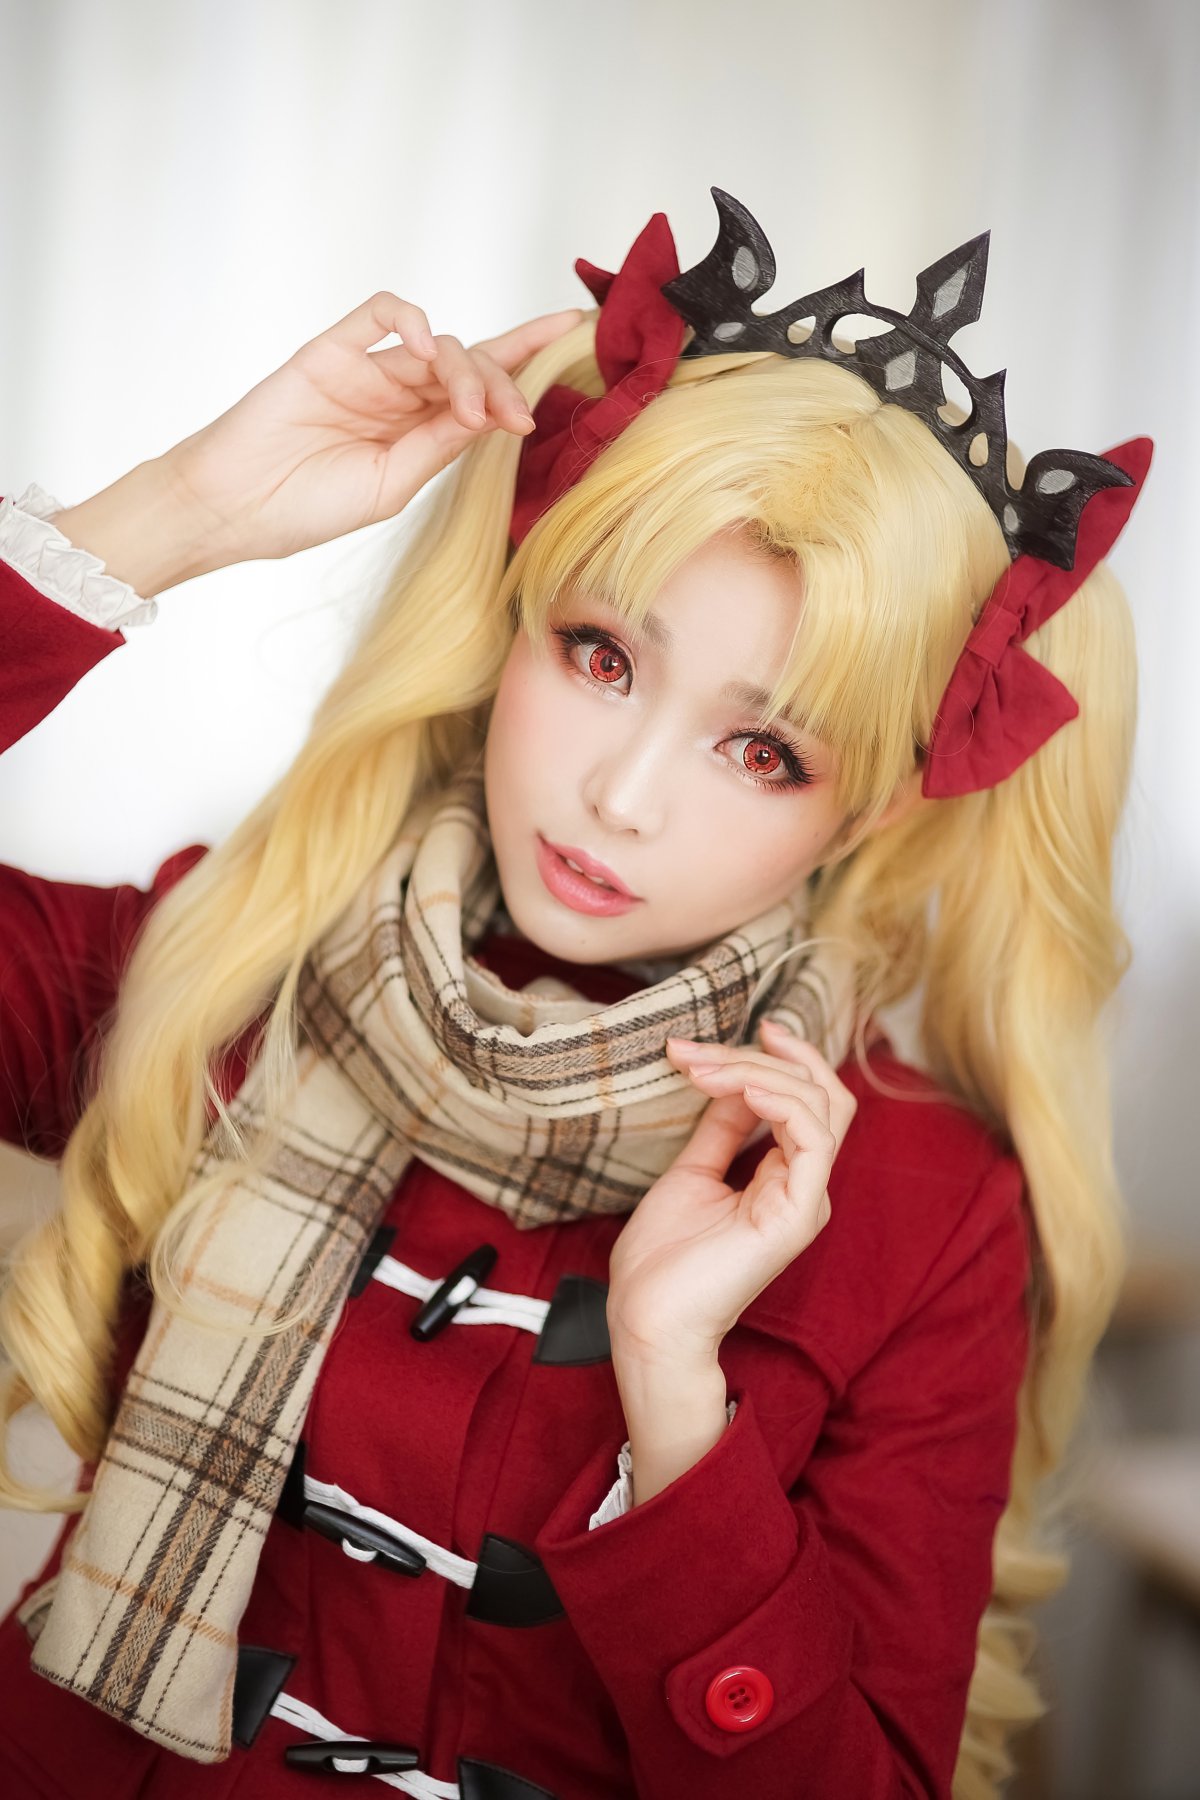 Coser@Ely Vol.022 ERE エレシュキガル 写真 A 0041